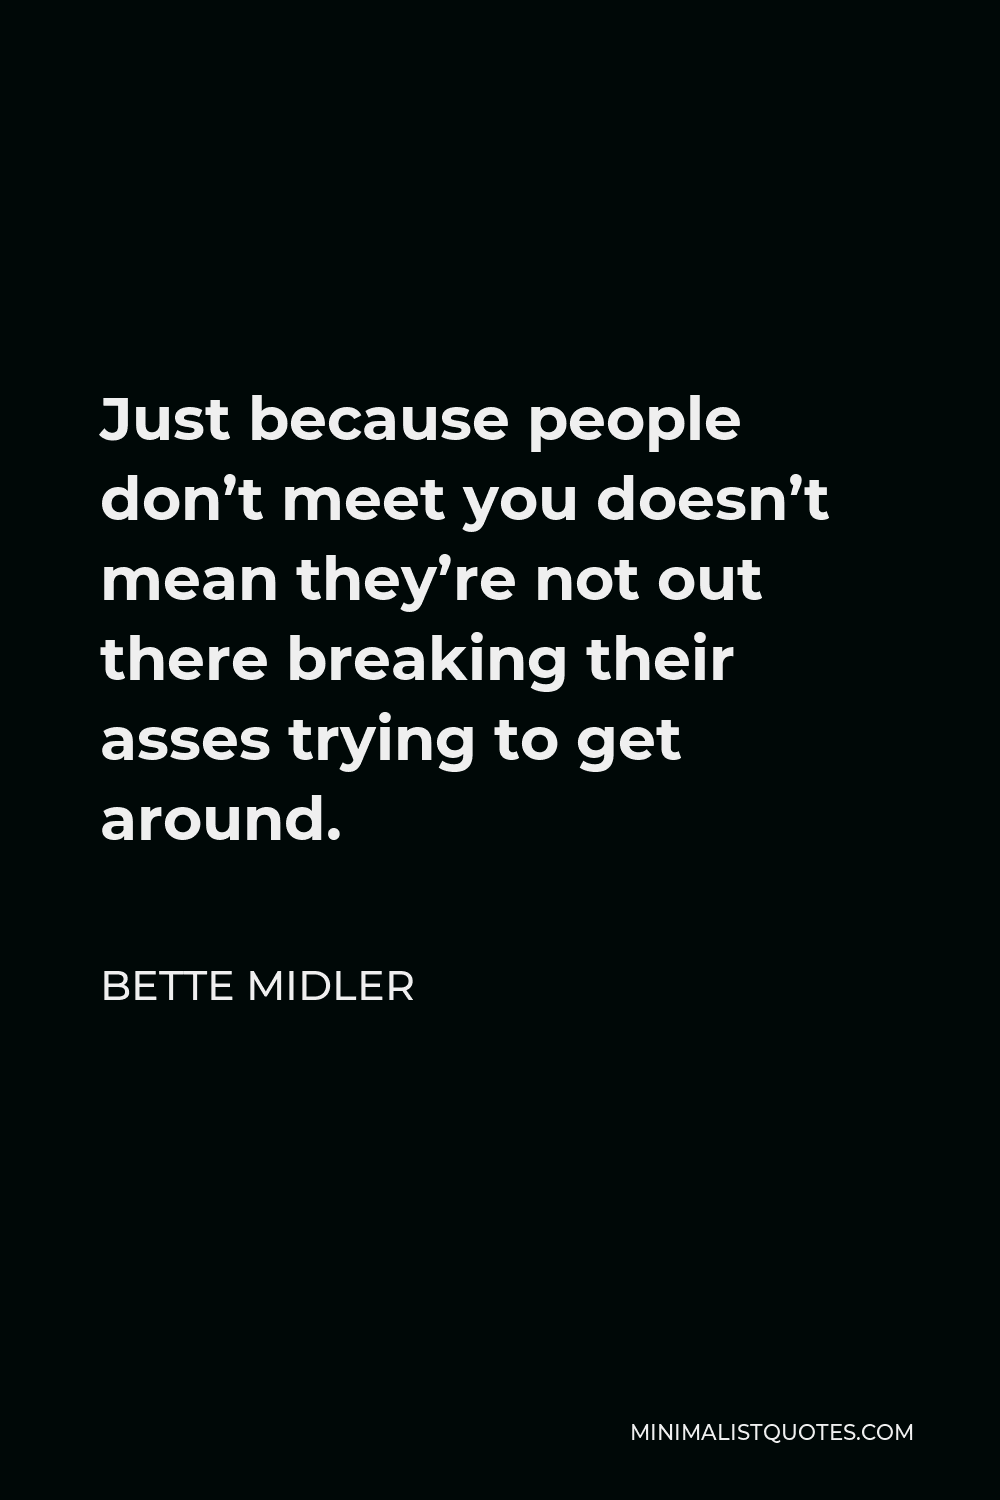 Bette Midler Quote - Just because people don’t meet you doesn’t mean they’re not out there breaking their asses trying to get around.